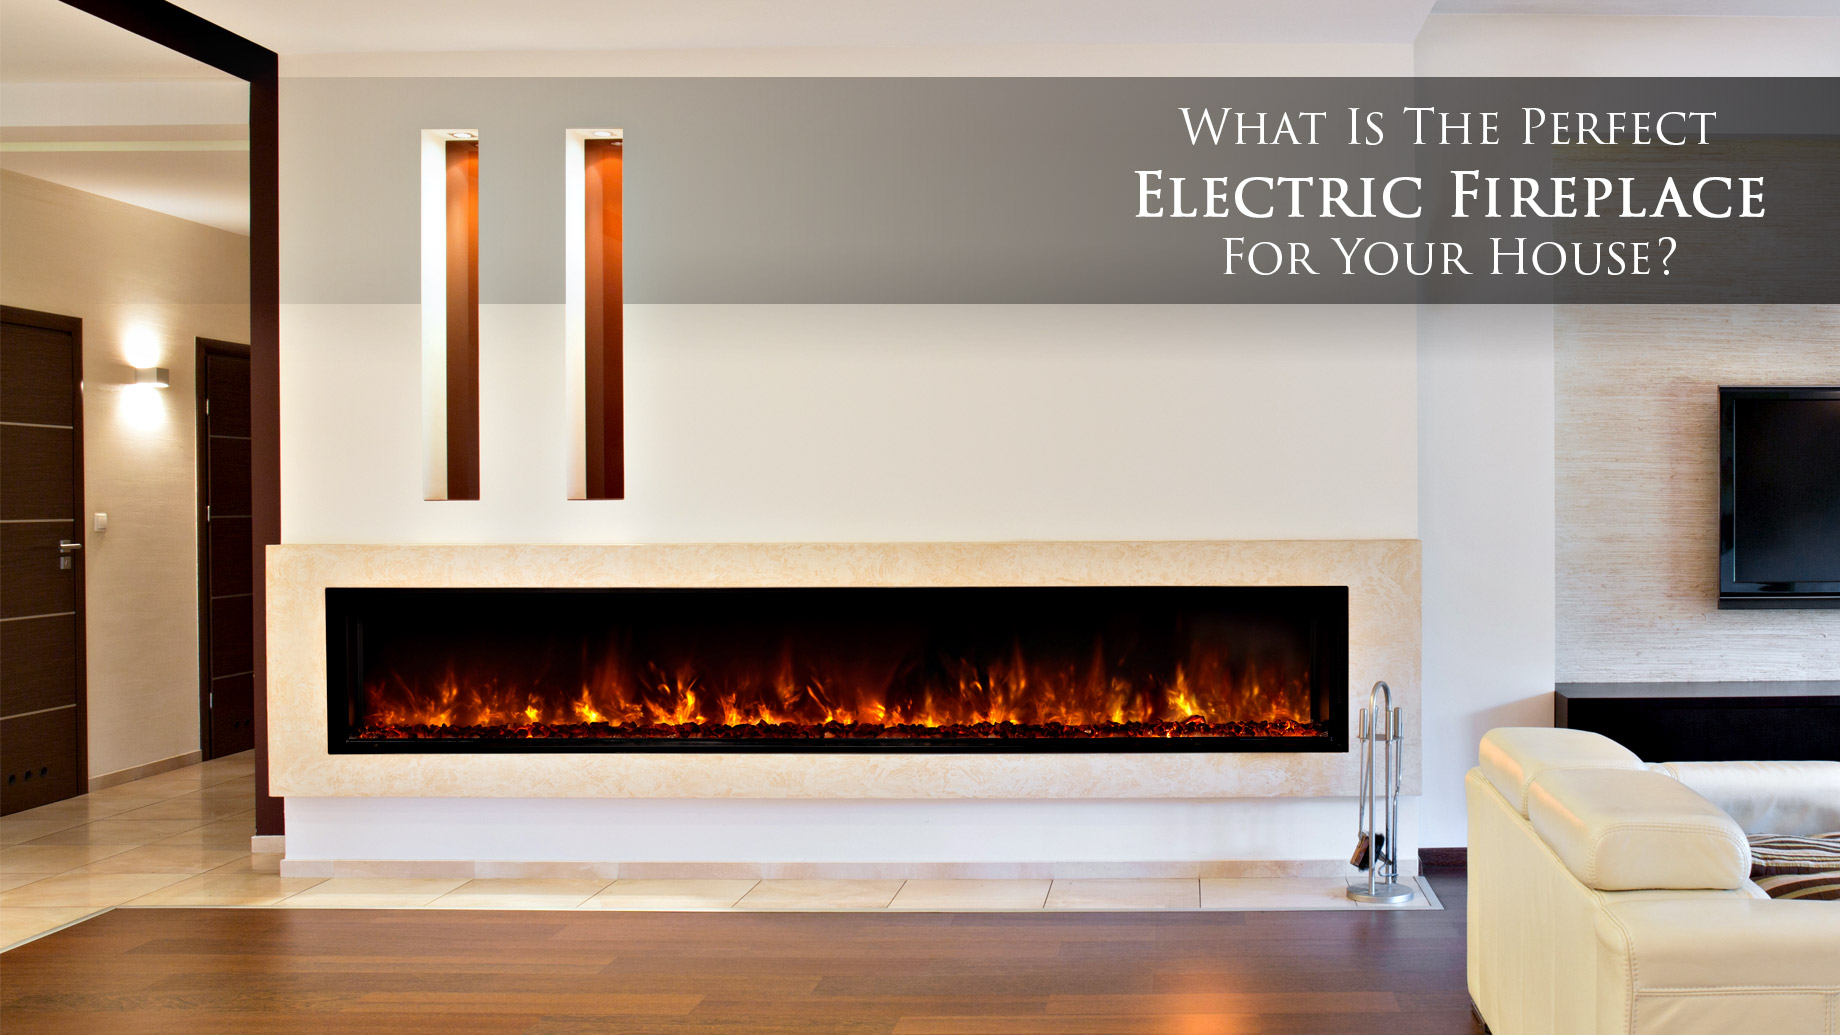 What Is The Perfect Electric Fireplace For Your House?